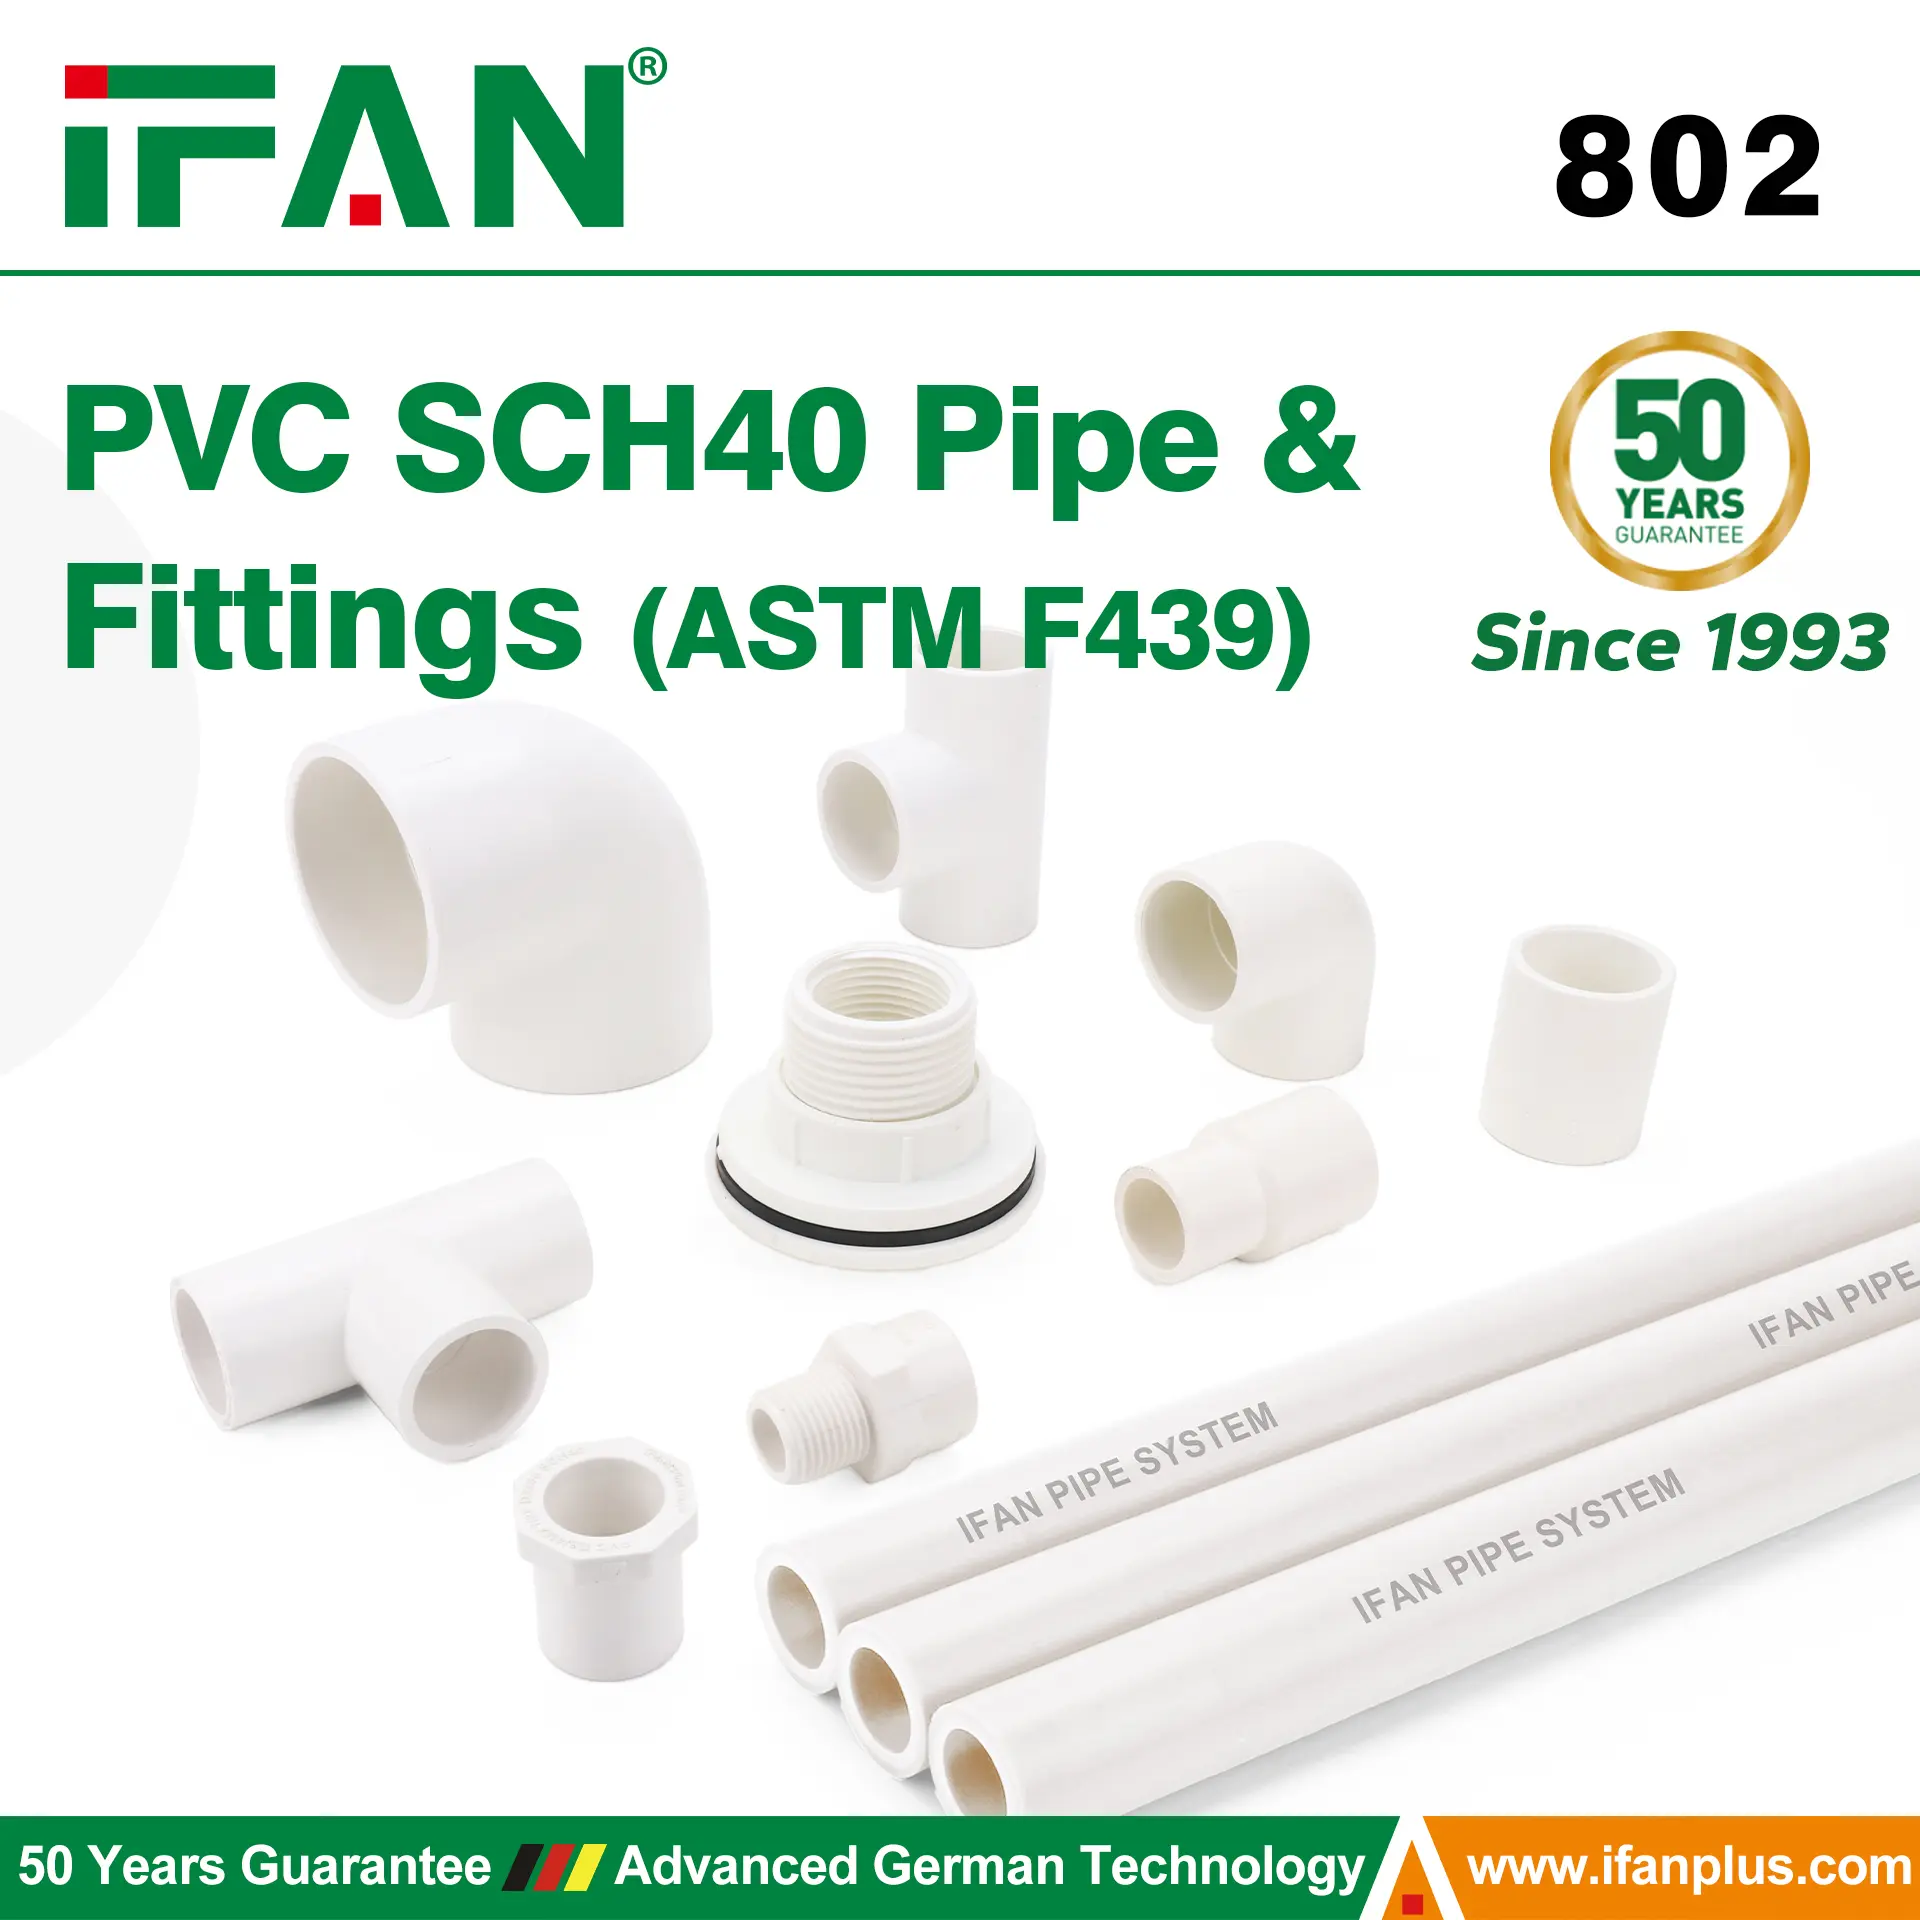 PVC SCH40 Pipe And Fittings ASTM F439